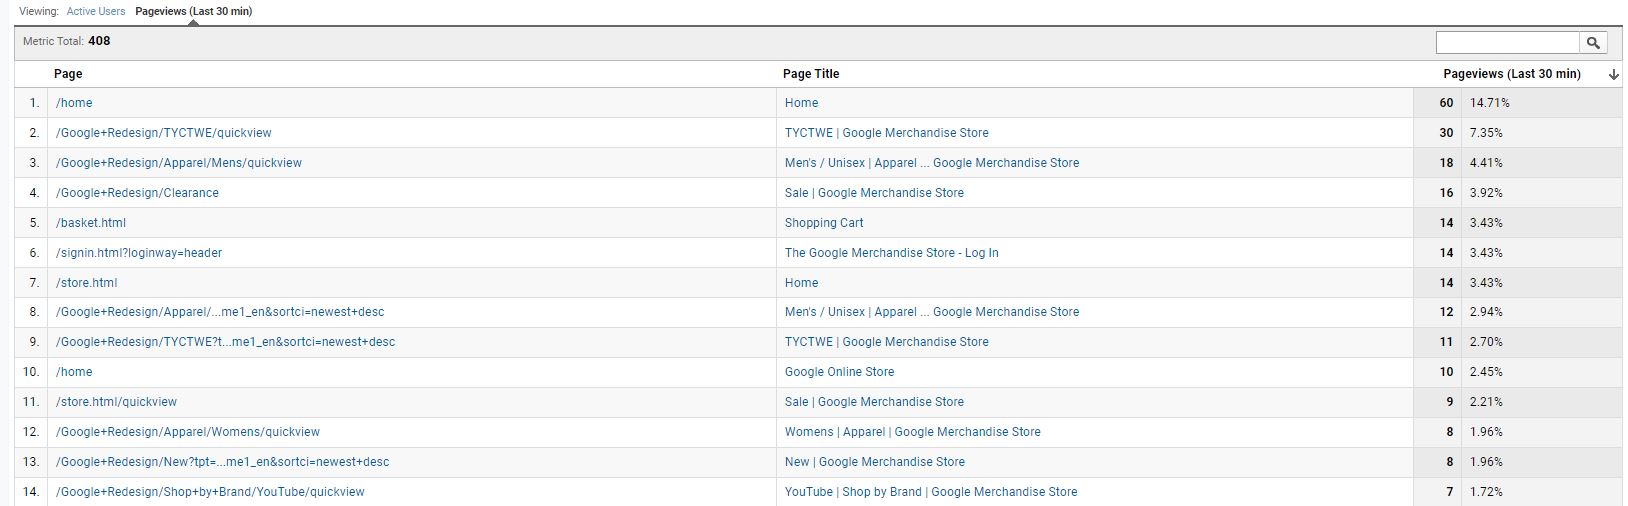 Google Analytics Real Time Content